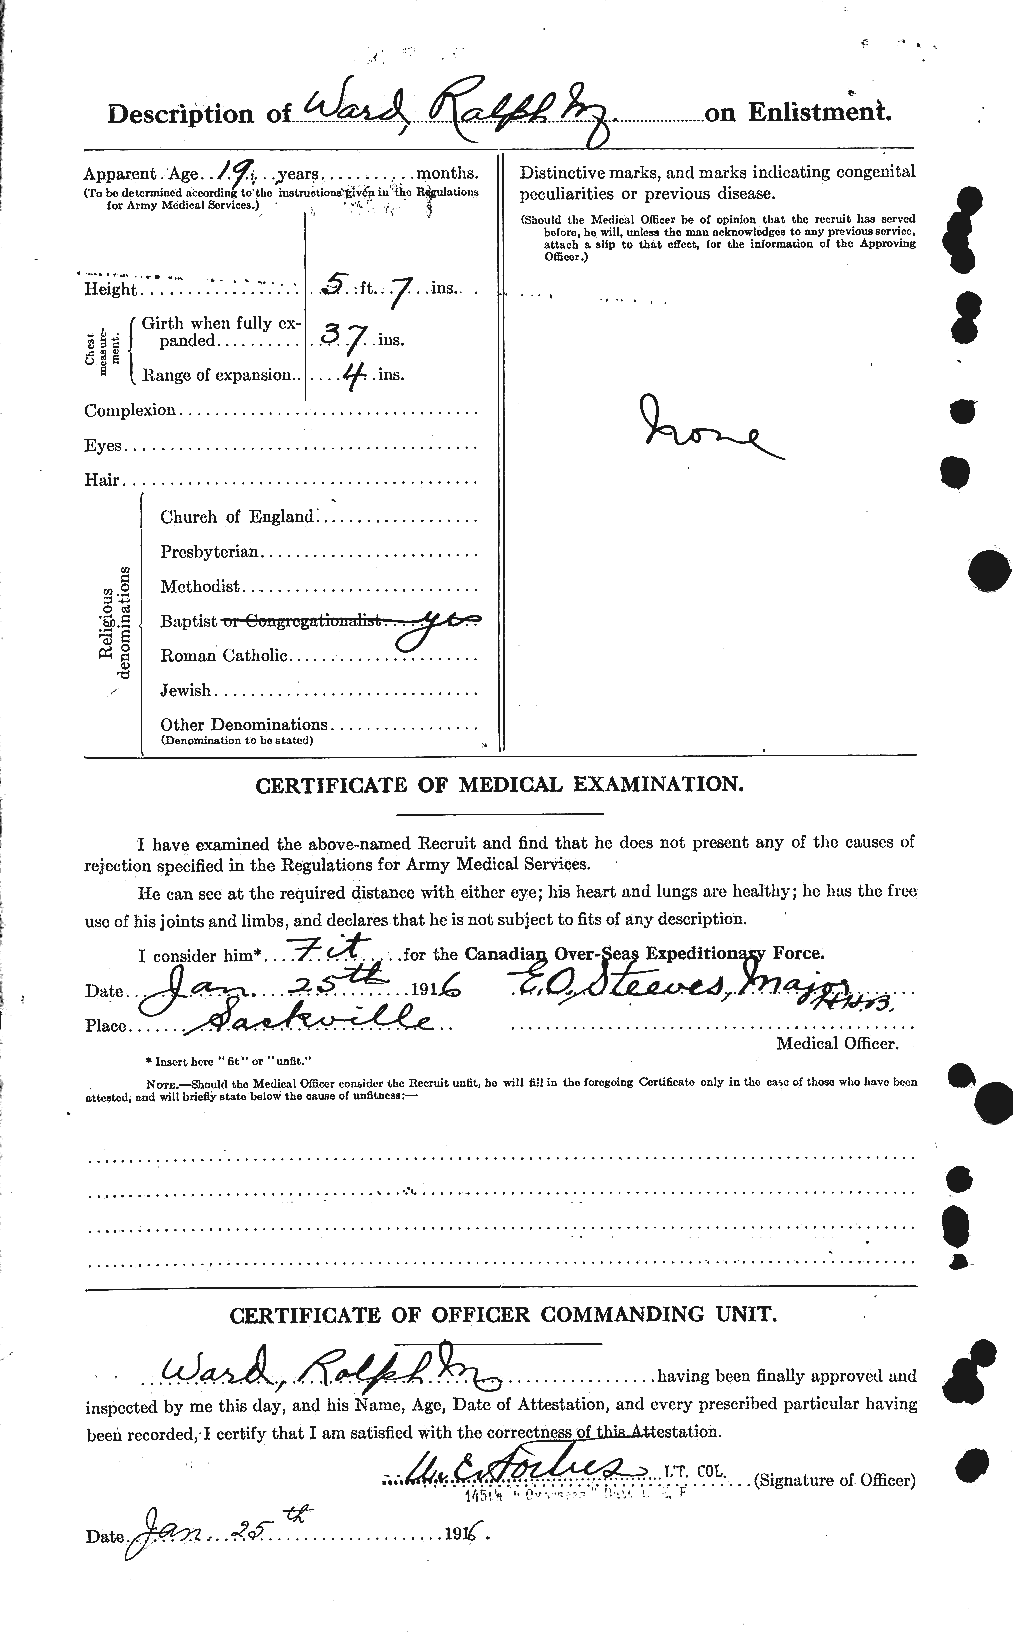 Personnel Records of the First World War - CEF 659634b